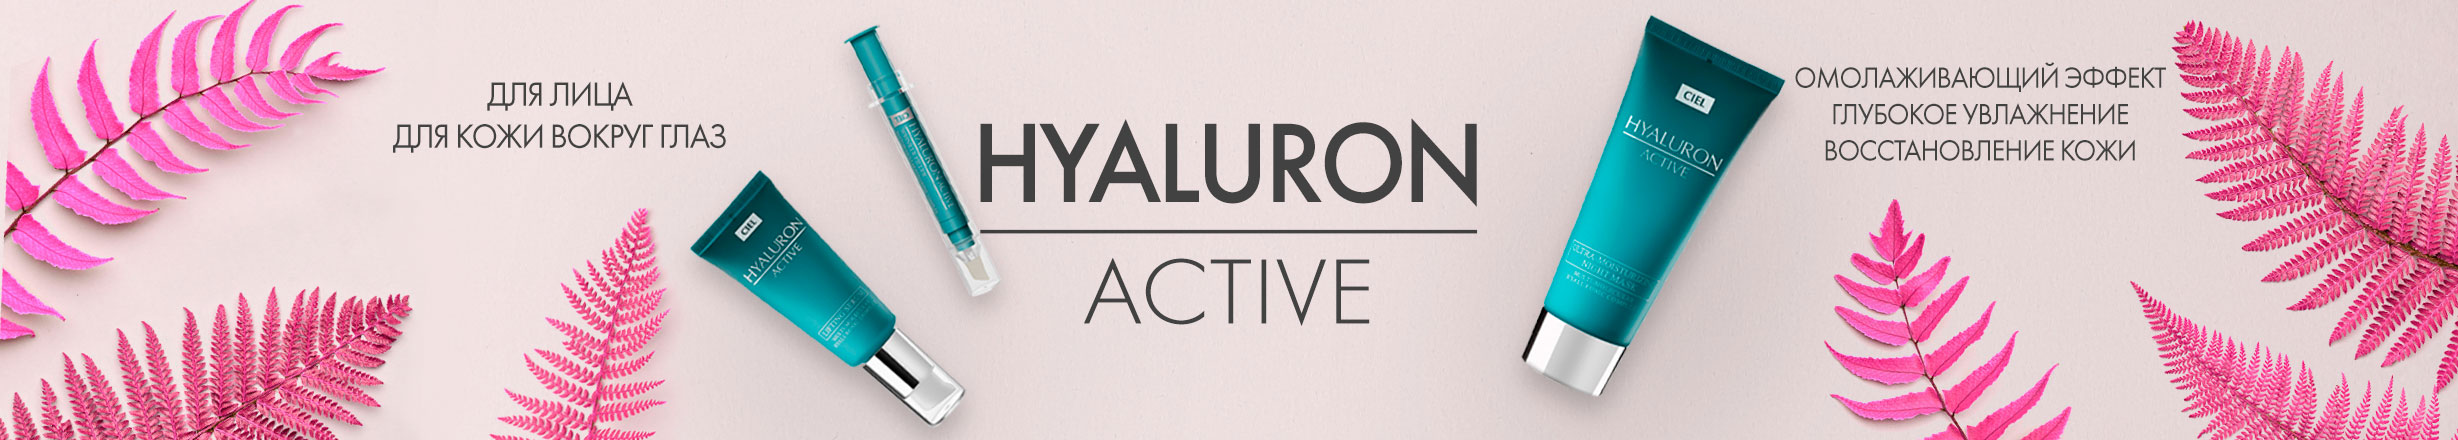 Hyaluron active